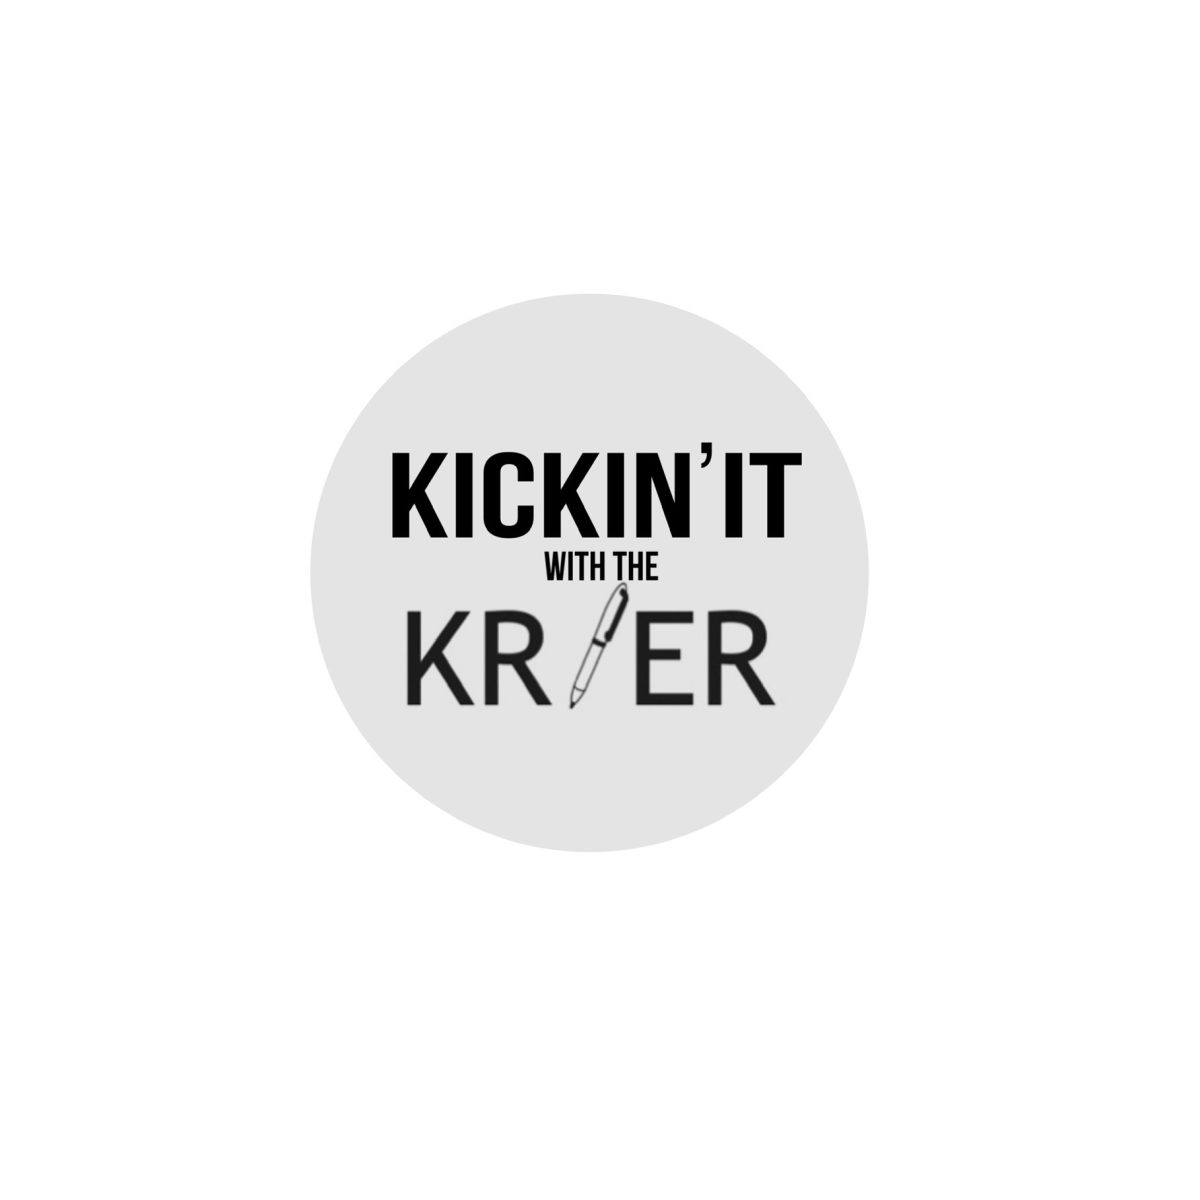 Kickin’ it with the Krier Episode 1